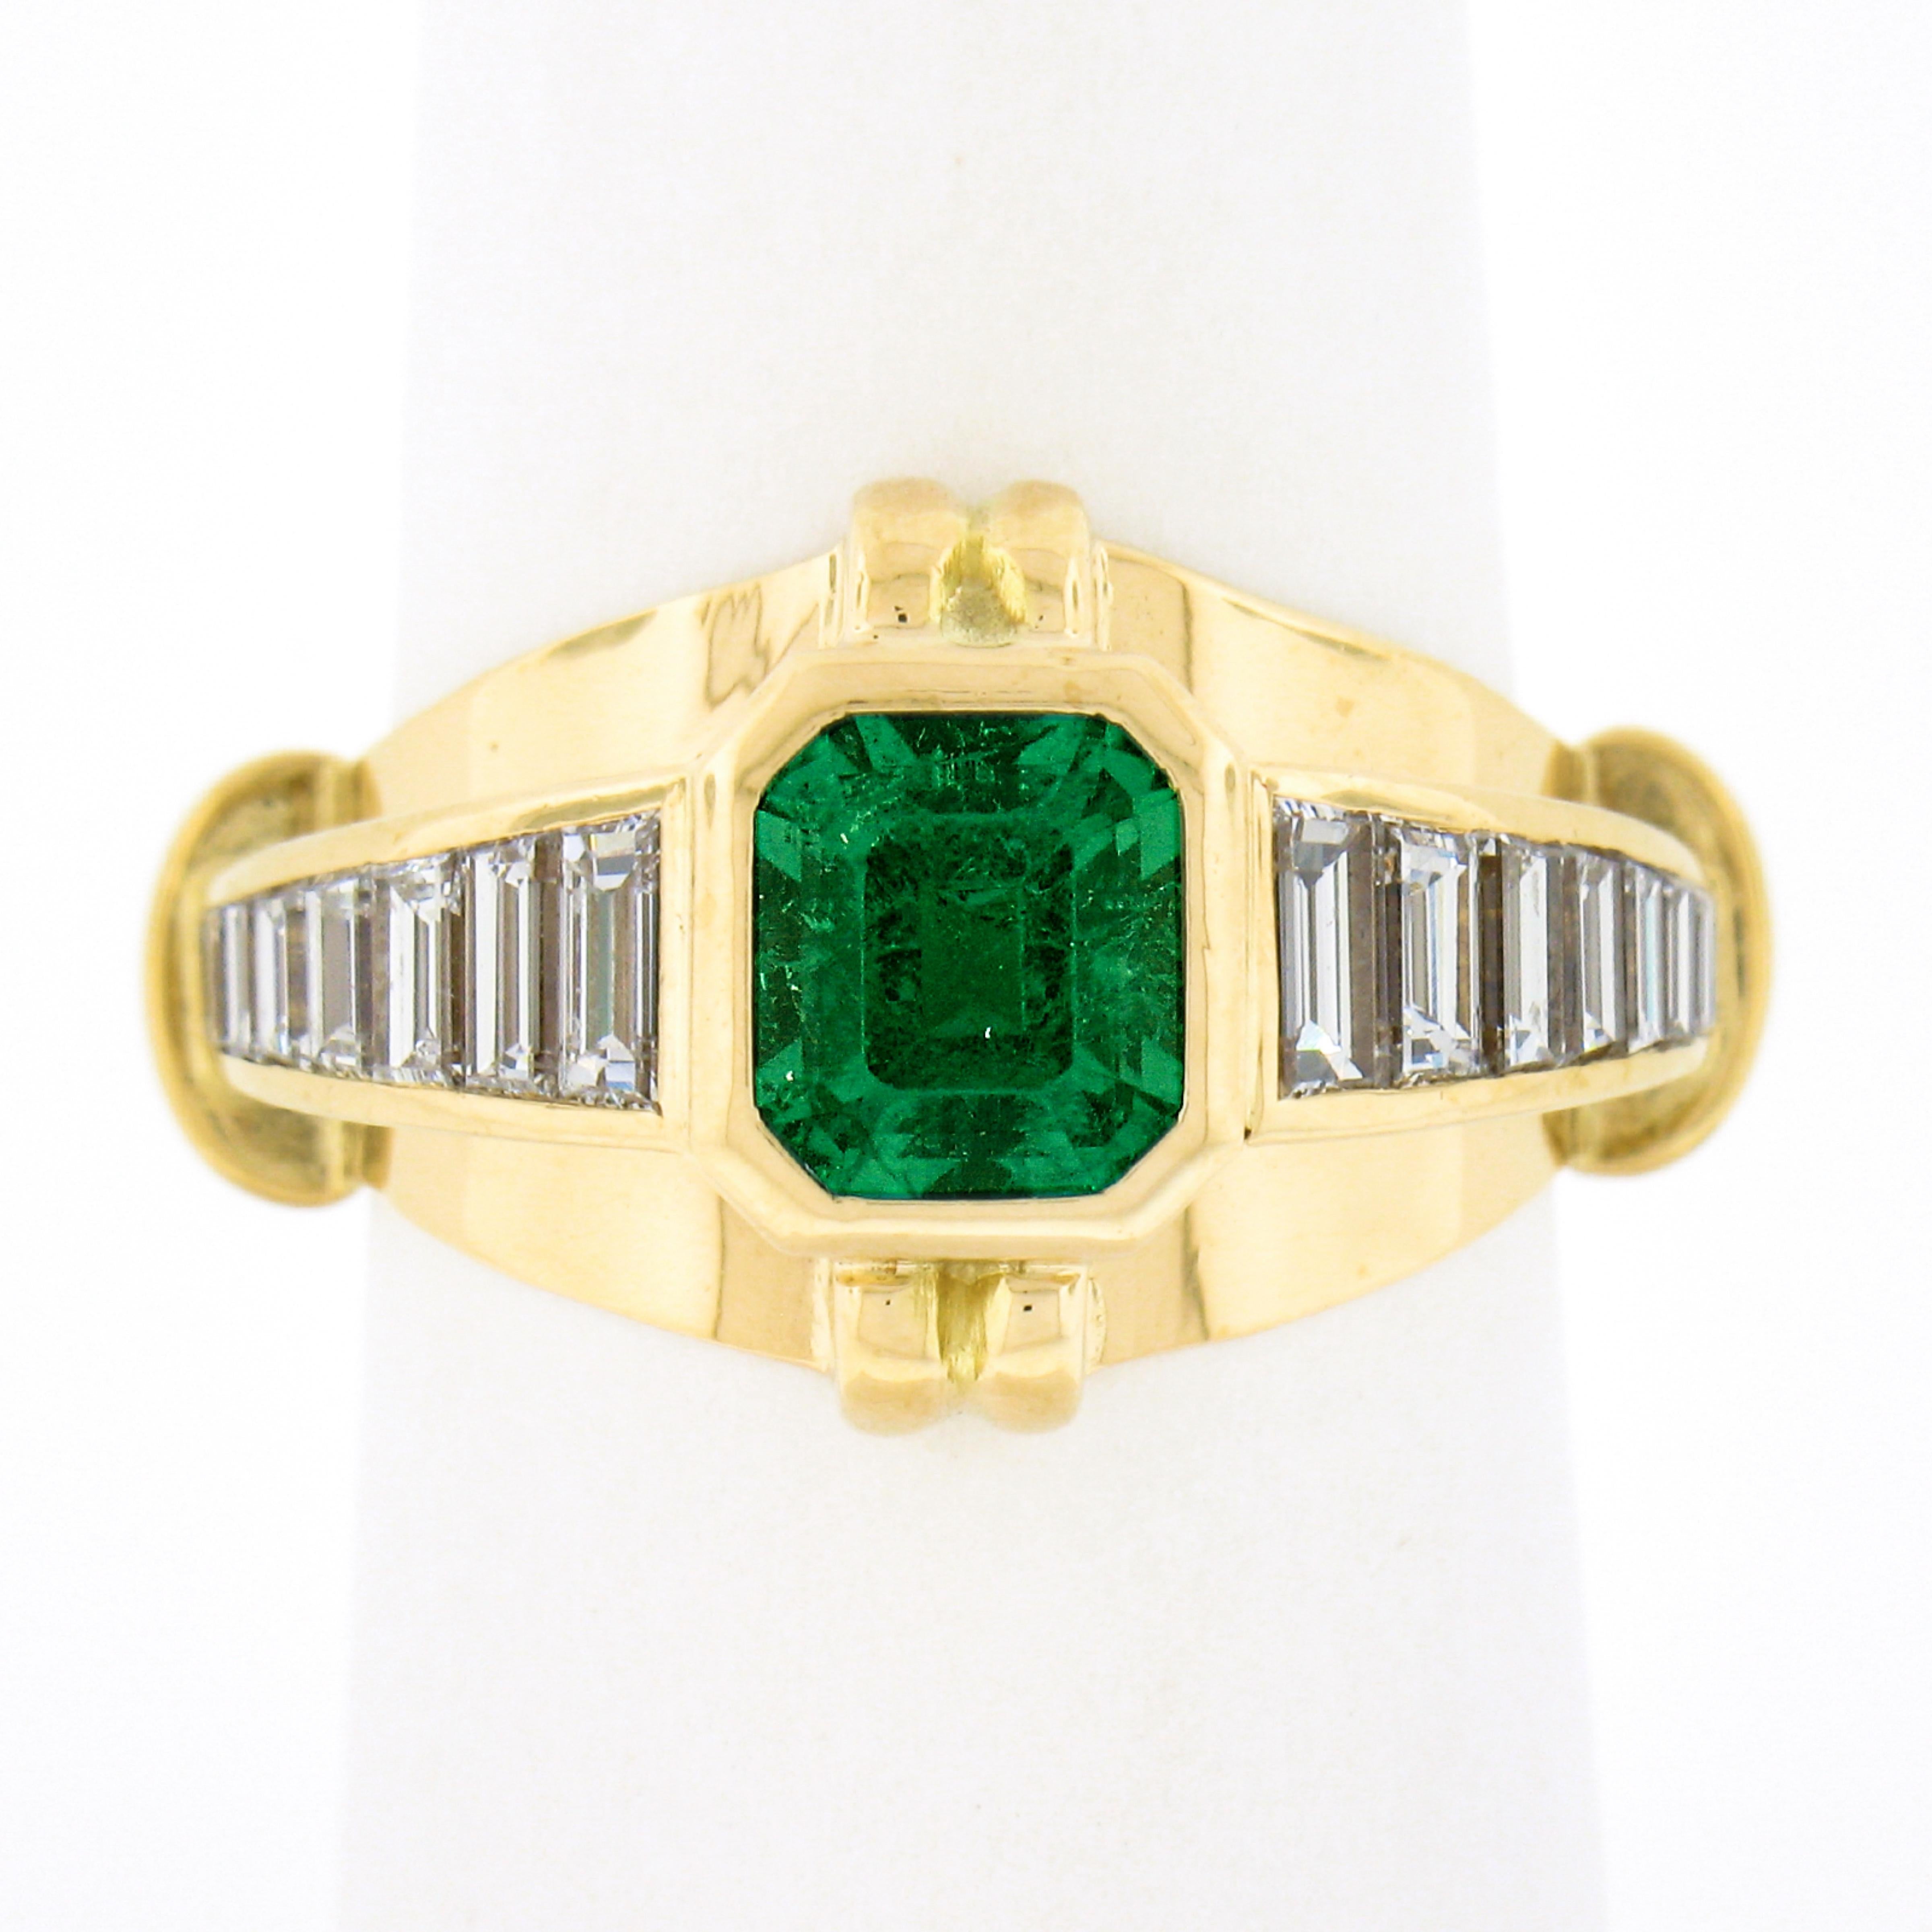 This Designer Chaumet ring is crafted in solid 18k yellow gold and features a GIA certified center emerald that is absolutely spectacular. This top quality octagonal step cut Colombian emerald sits at the center of an incredibly designed ring that